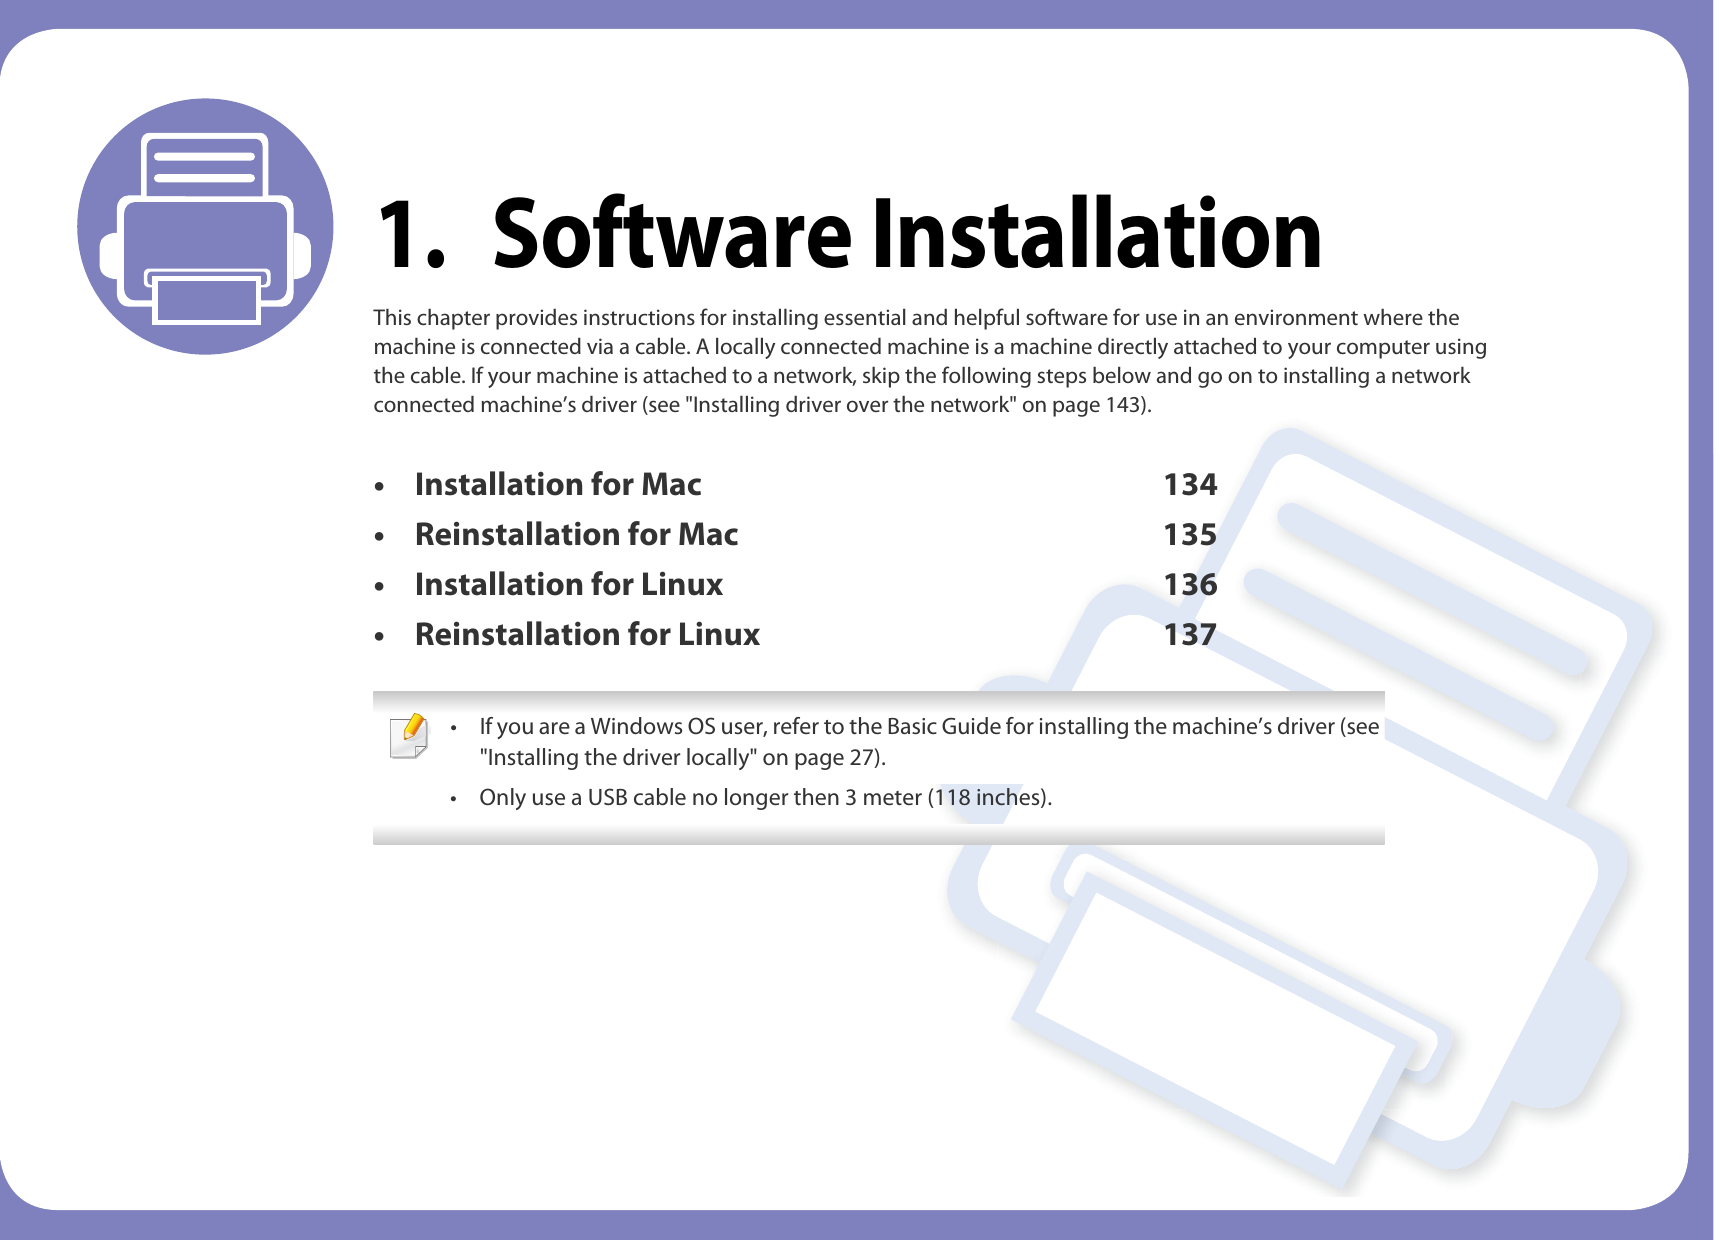 1. Software InstallationThis chapter provides instructions for installing essential and helpful software for use in an environment where the machine is connected via a cable. A locally connected machine is a machine directly attached to your computer using the cable. If your machine is attached to a network, skip the following steps below and go on to installing a network connected machine’s driver (see &quot;Installing driver over the network&quot; on page 143).• Installation for Mac 134• Reinstallation for Mac 135• Installation for Linux 136• Reinstallation for Linux 137 • If you are a Windows OS user, refer to the Basic Guide for installing the machine’s driver (see &quot;Installing the driver locally&quot; on page 27).• Only use a USB cable no longer then 3 meter (118 inches). 